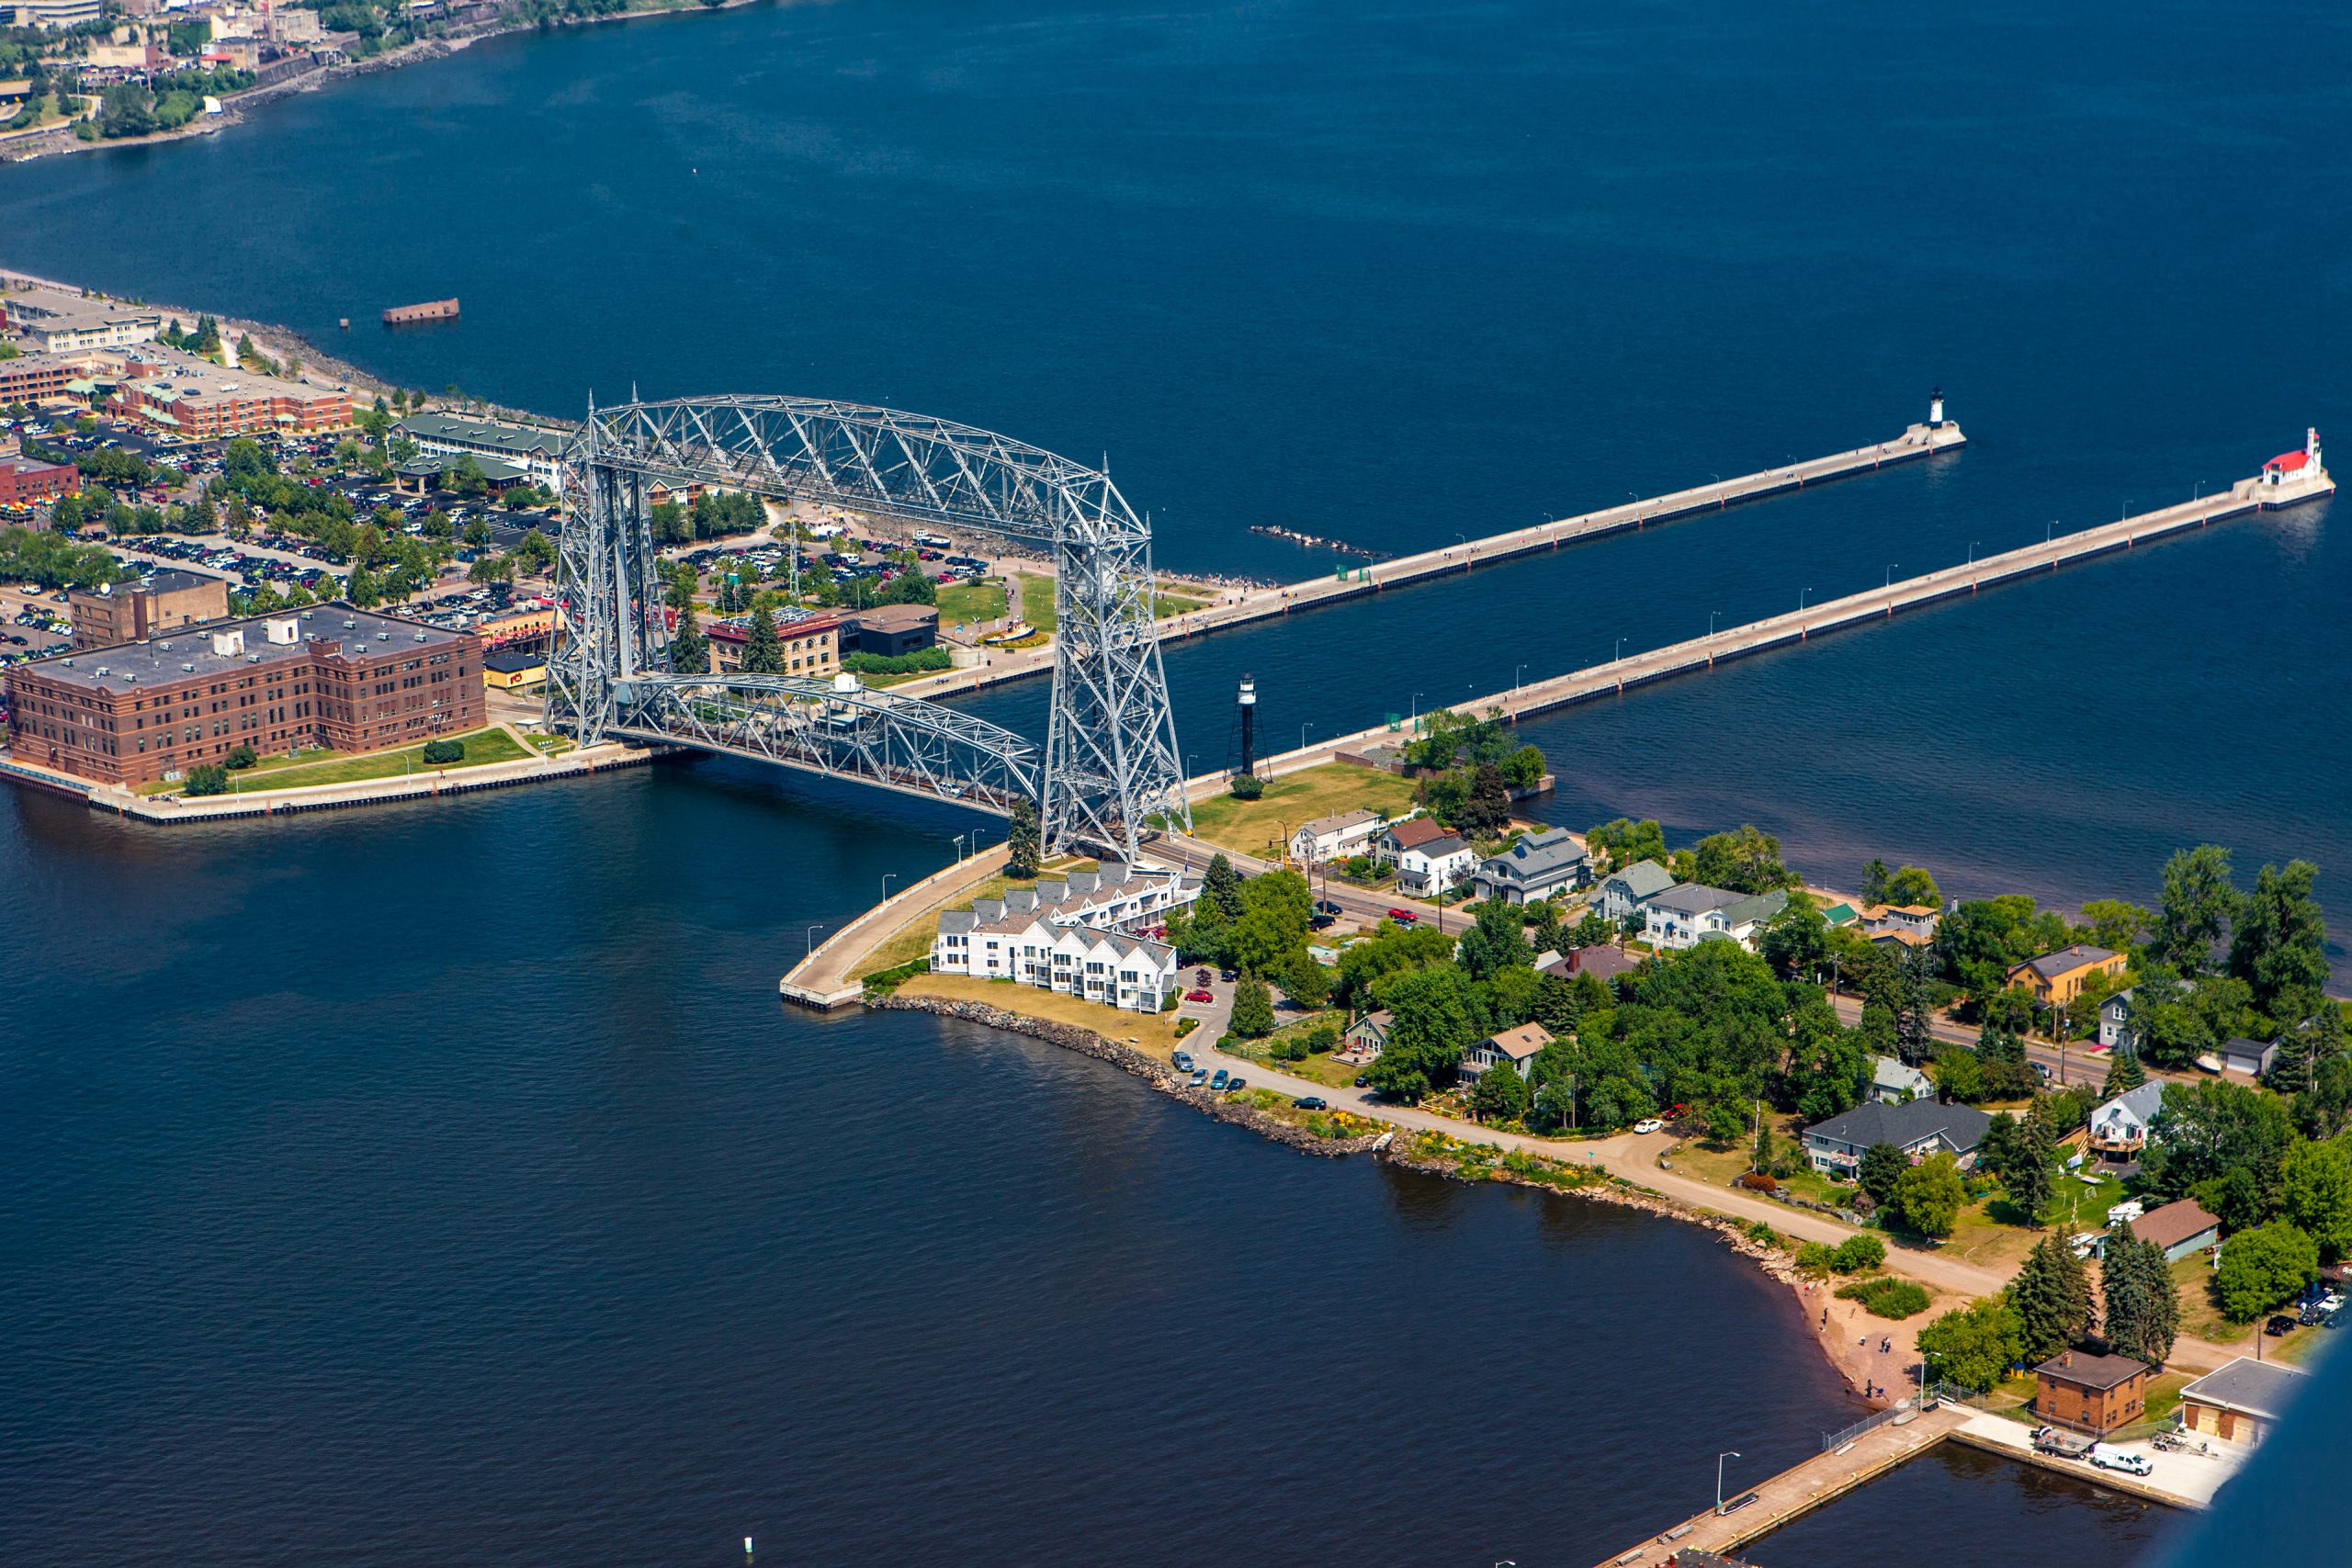 Arial shot of The Aerial Lift Bridge and canal in Duluth, MN.